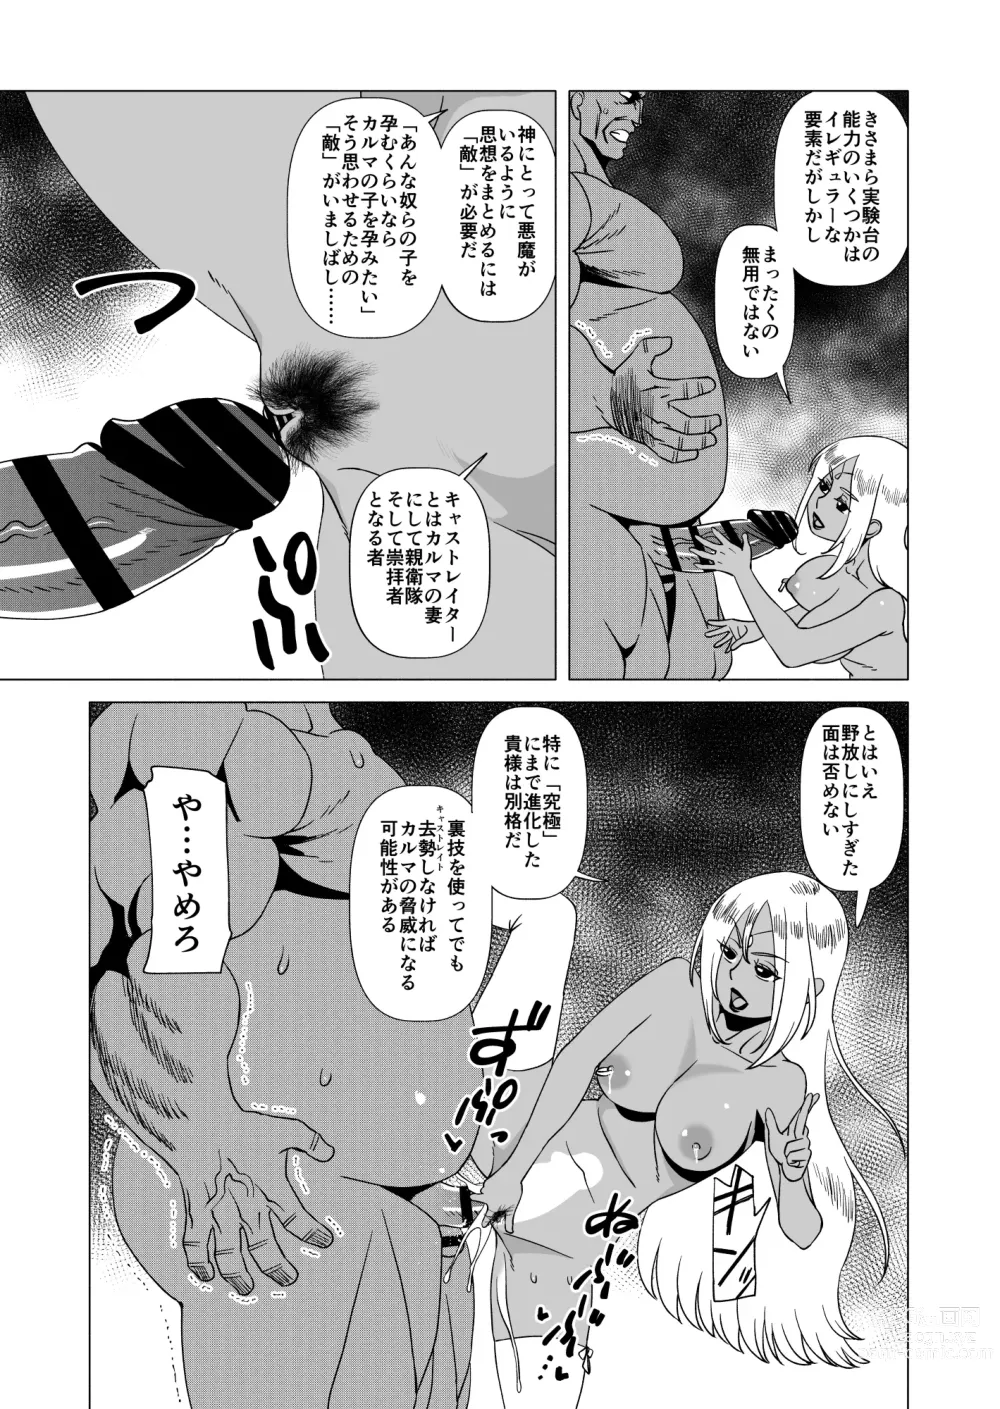 Page 34 of doujinshi CASTRATER 4